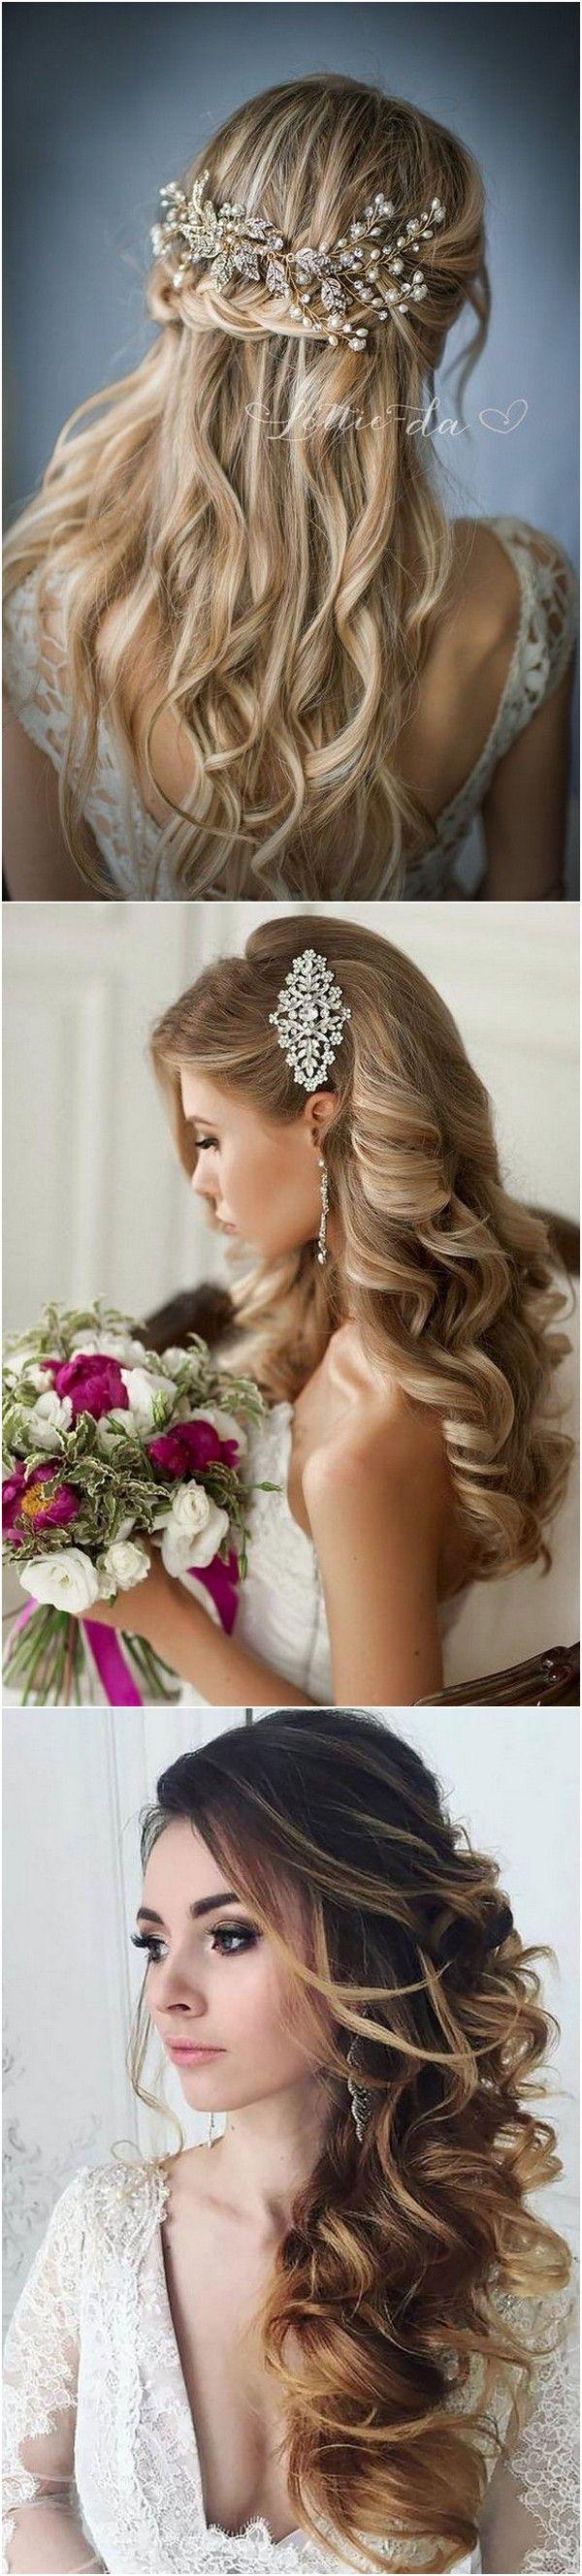 Mariage - Top 20 Vintage Wedding Hairstyles For Brides - Page 3 Of 3